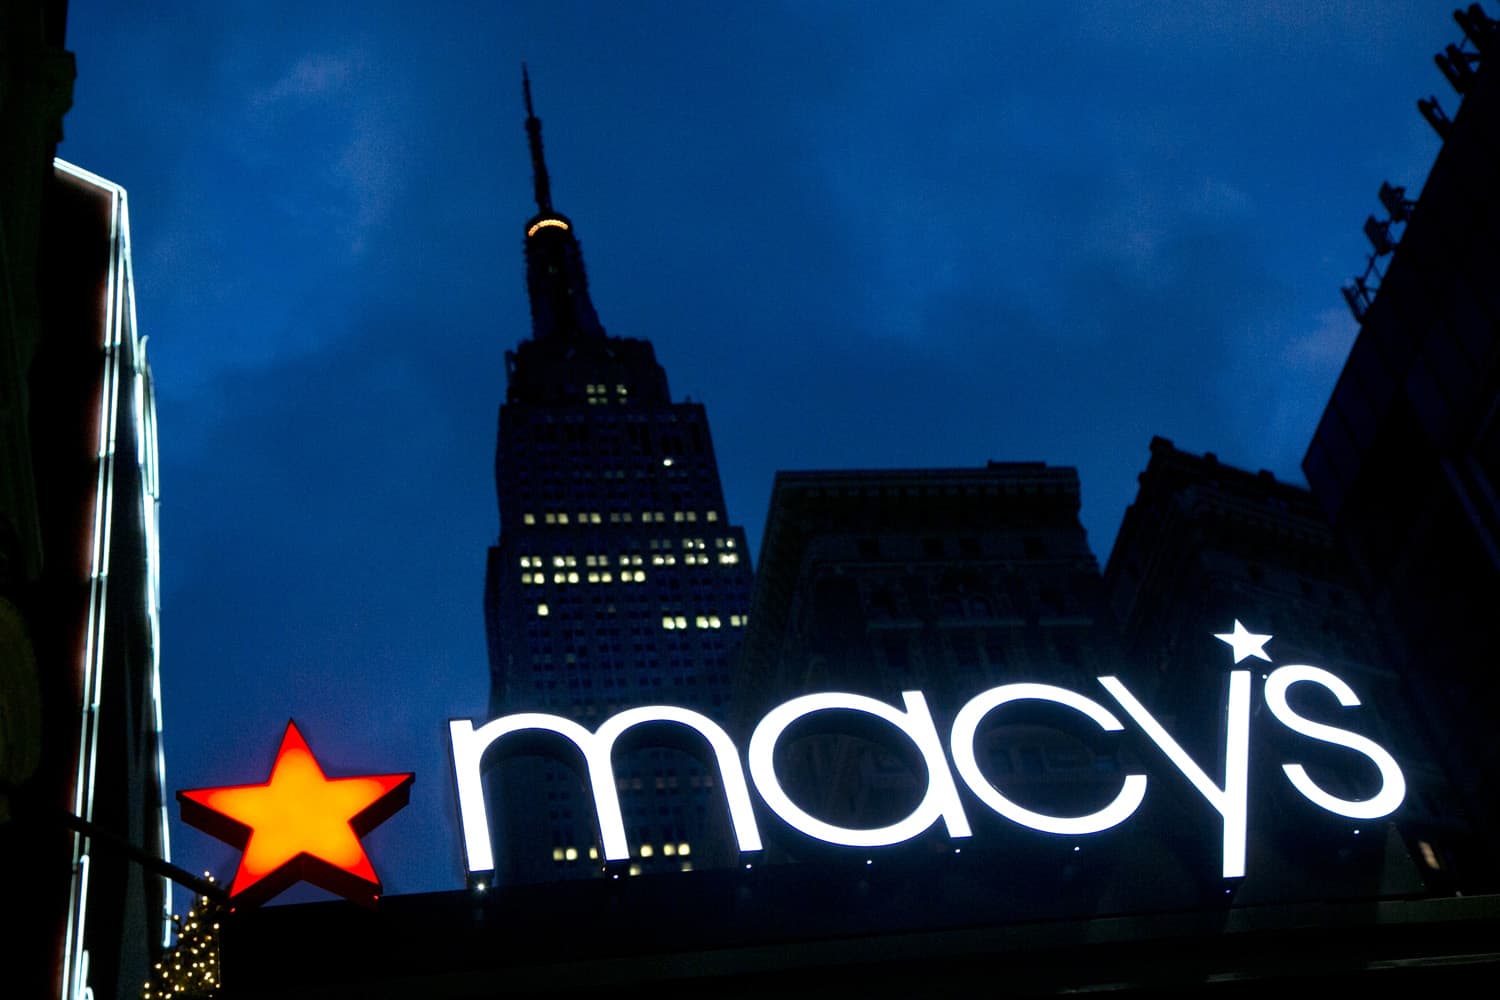 In this Nov. 21, 2013, file photo, with the Empire State building in the background, the Macy's logo is illuminated on the front of the department store in New York. (Mark Lennihan, File/AP)